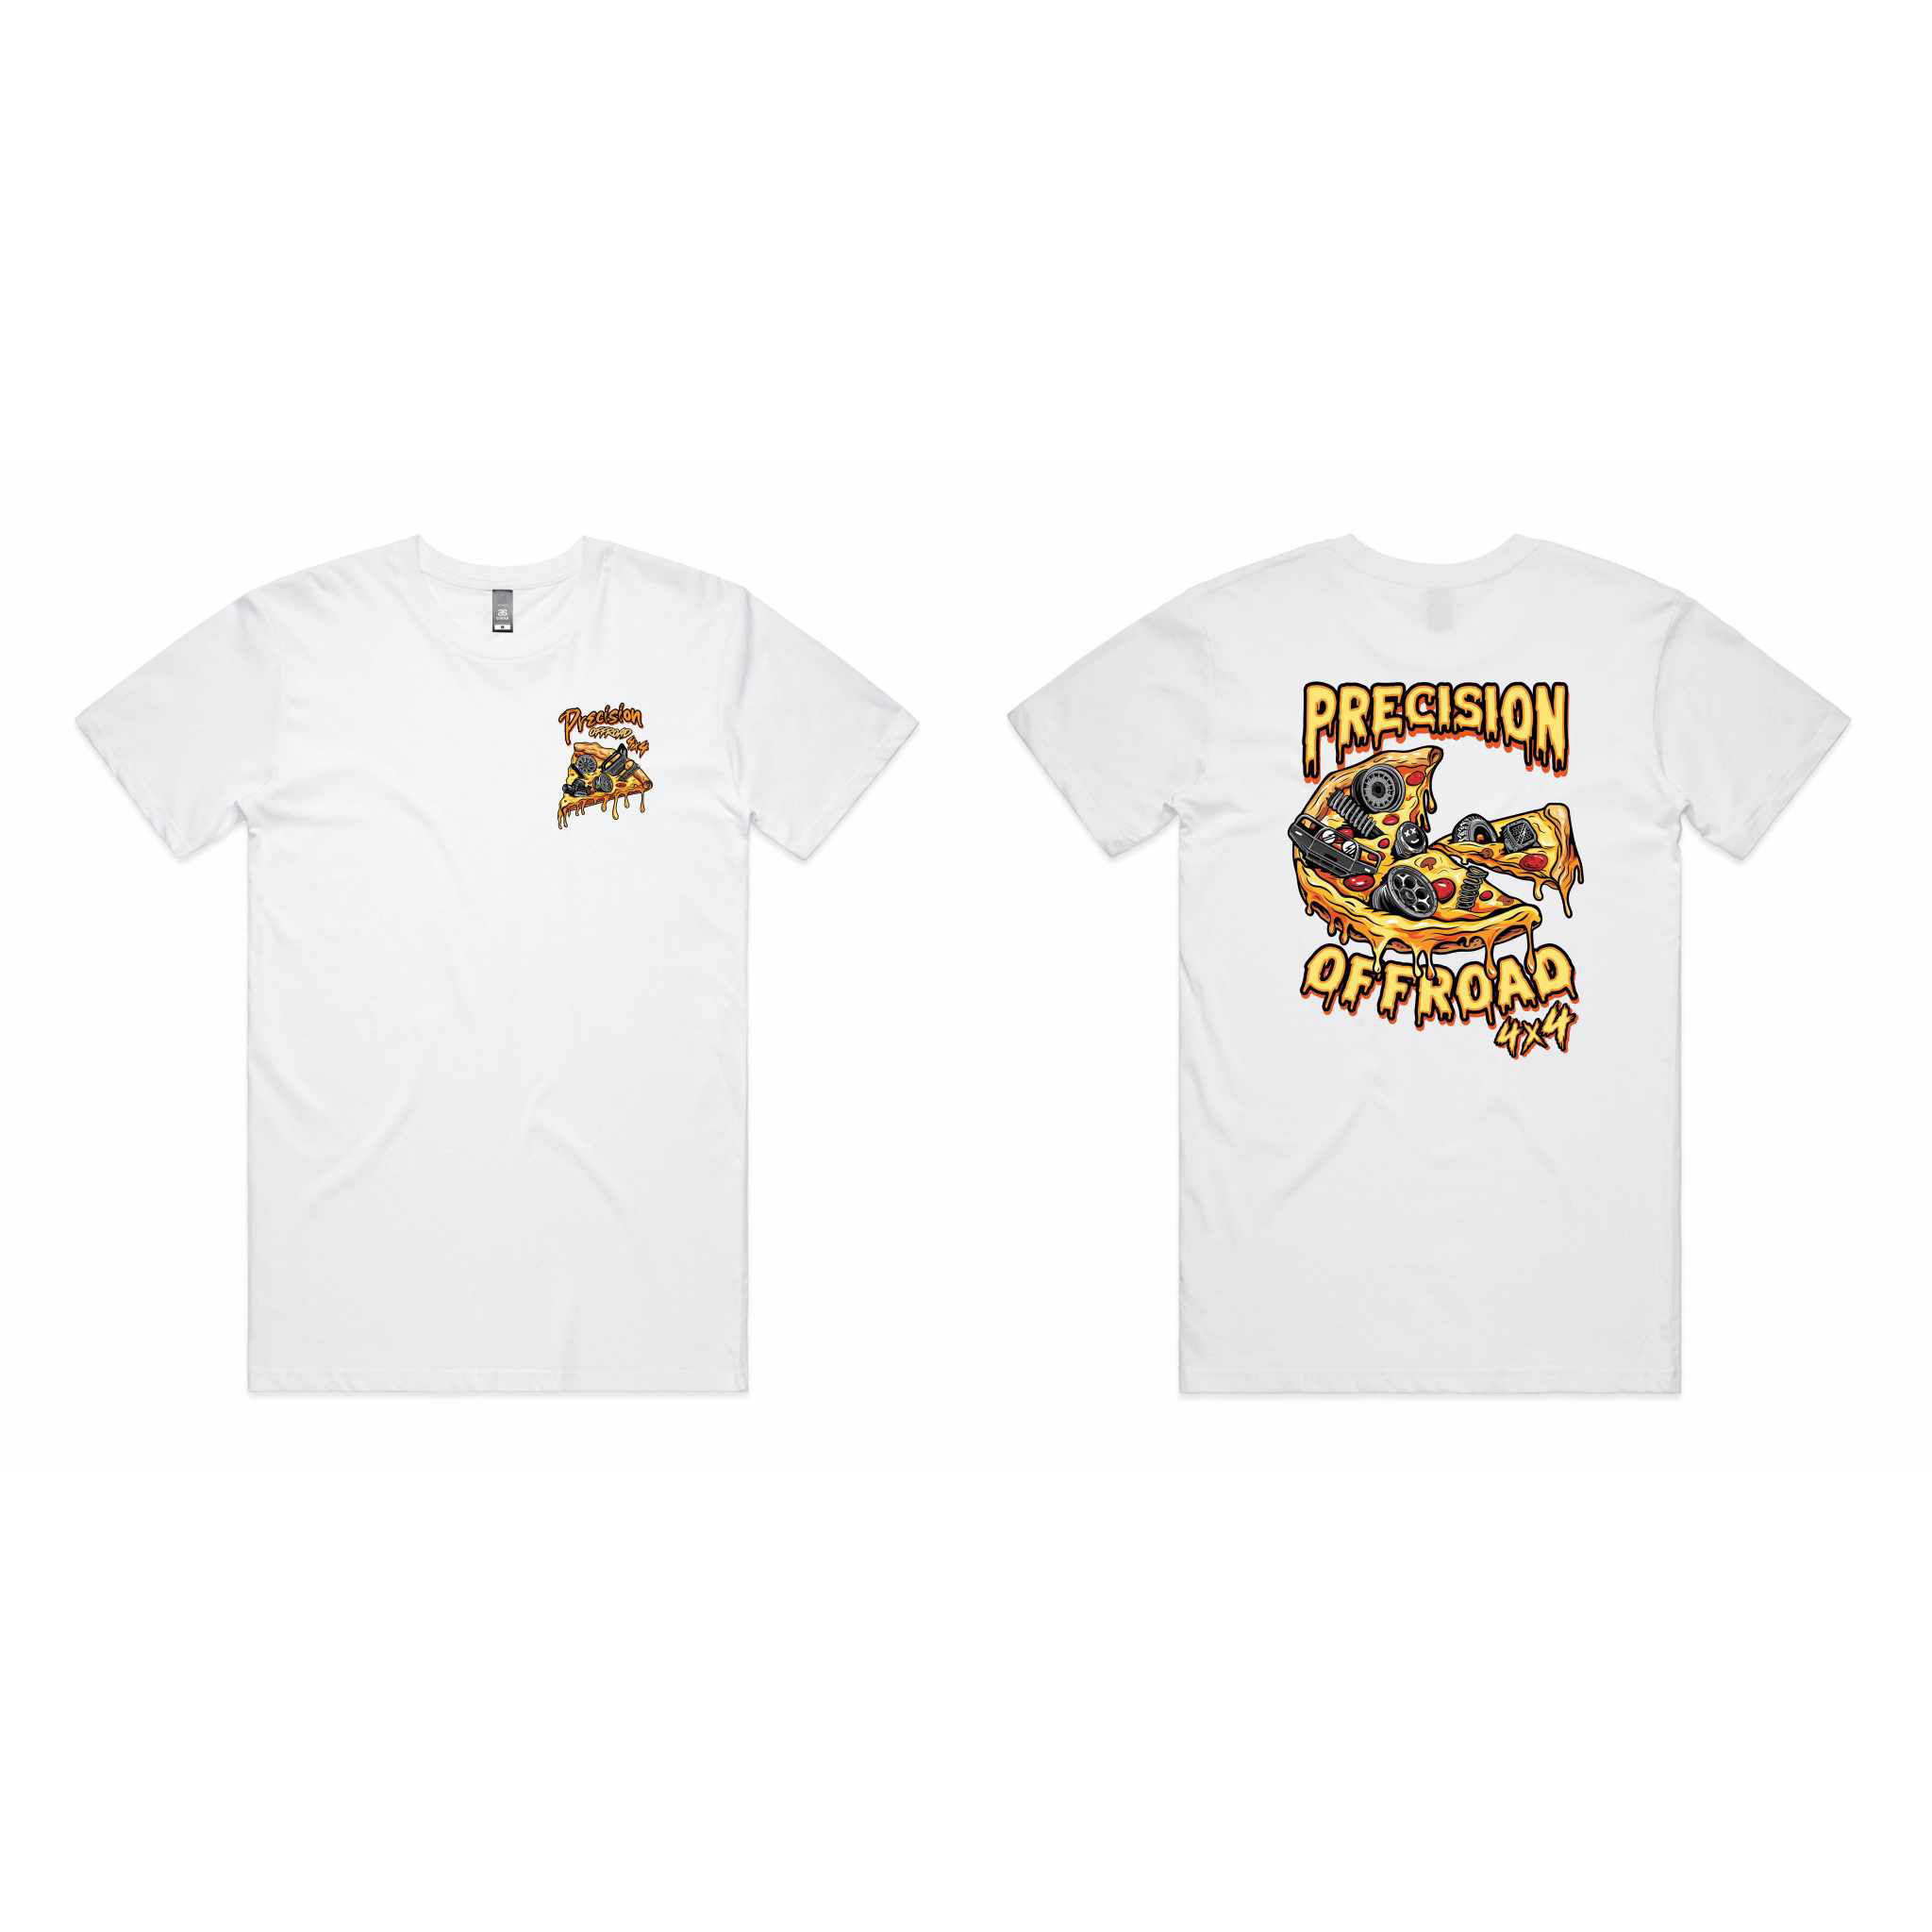 THE PIZZA TEE - WHITE EDITION